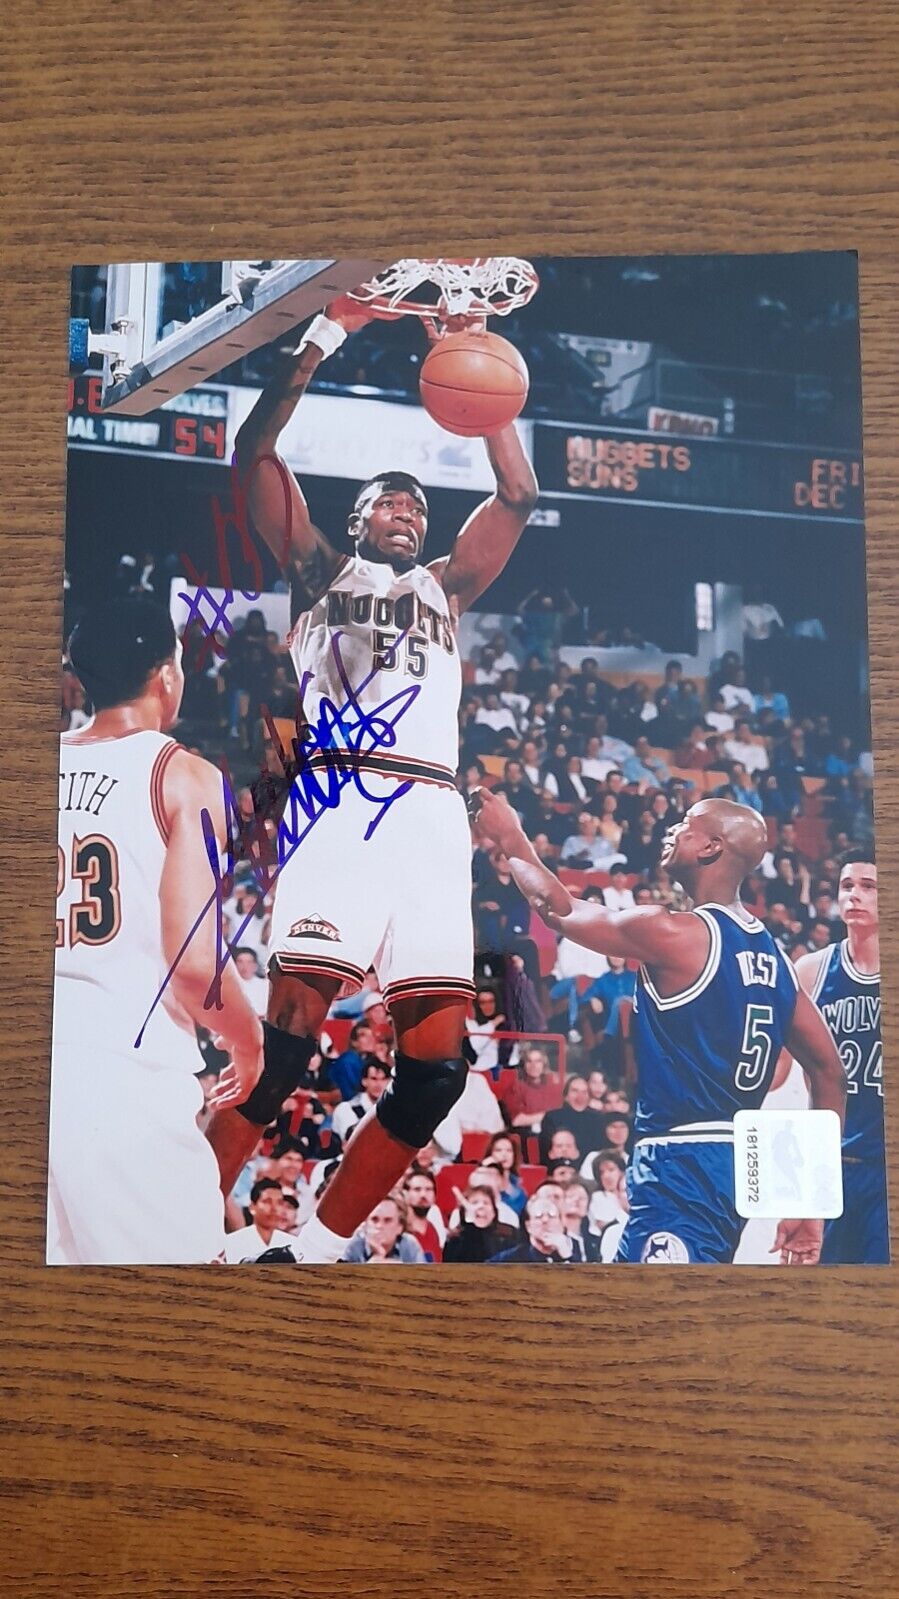 DIKEMBE MUTOMBO photo 25x20cm signed signed - DENVER NUGGETS - AUTHENTIC AUTOGRAPH